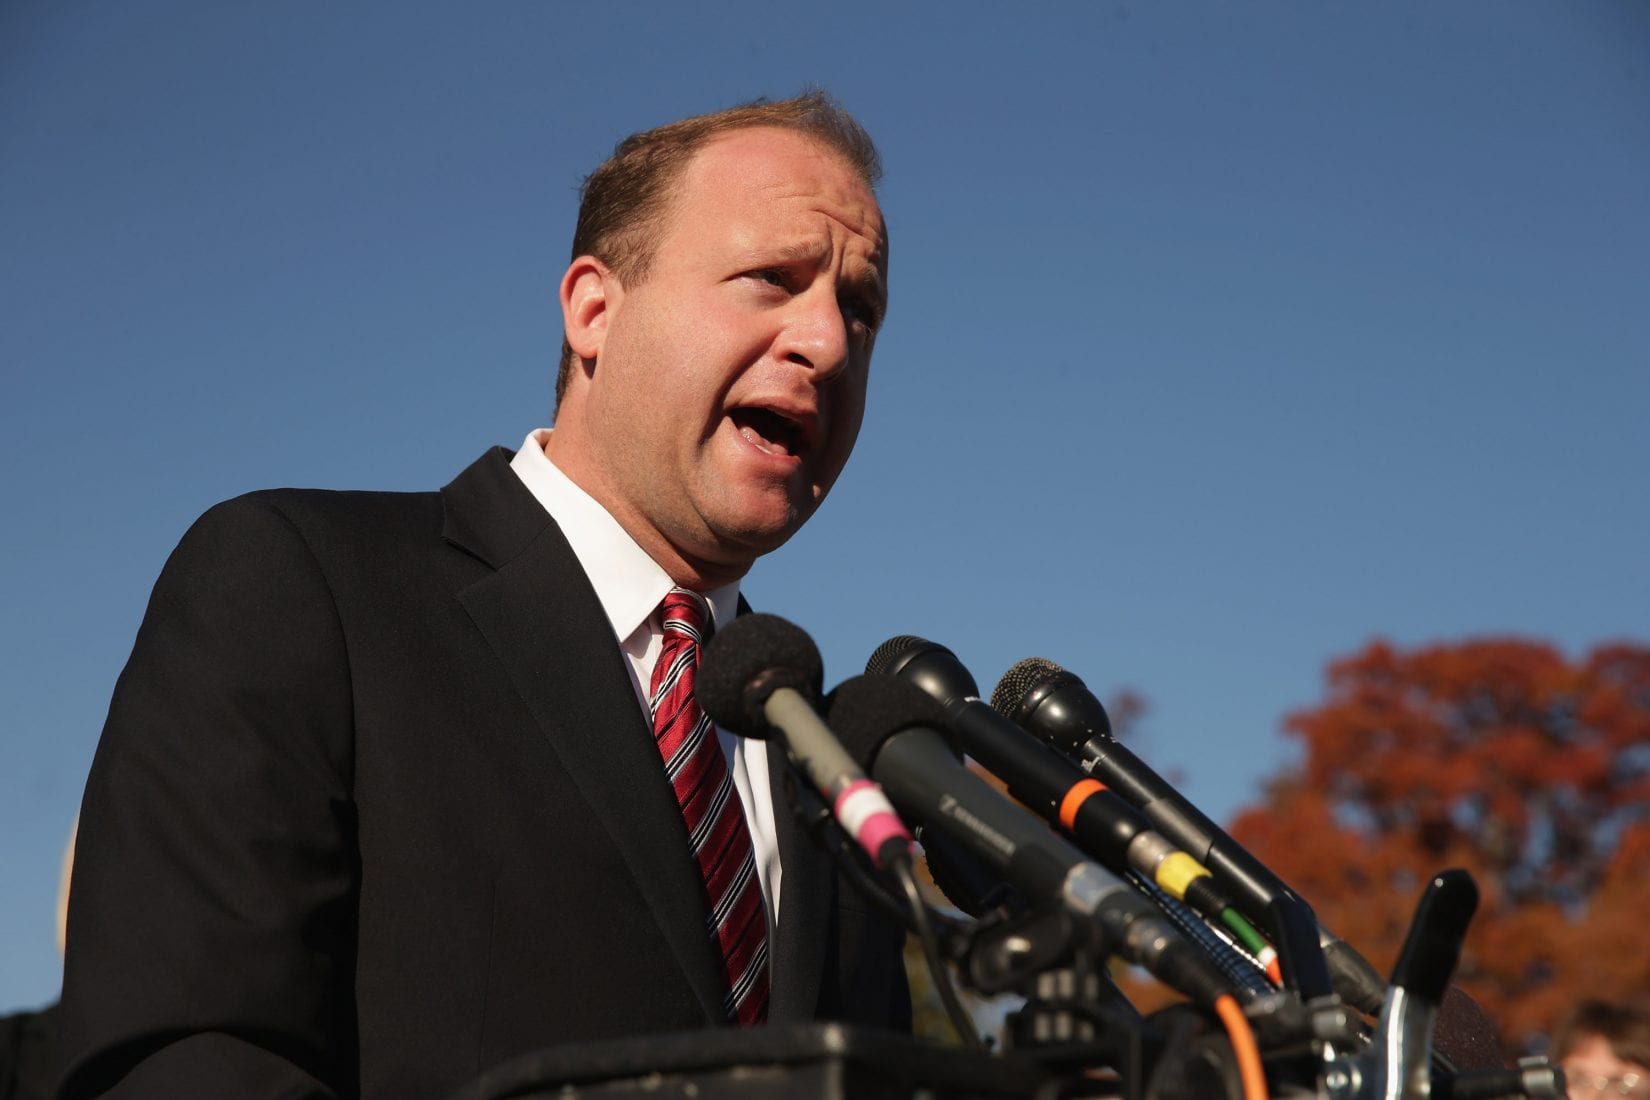 U.S. Rep. Jared Polis joins with congressional colleagues to create Cannabis Caucus